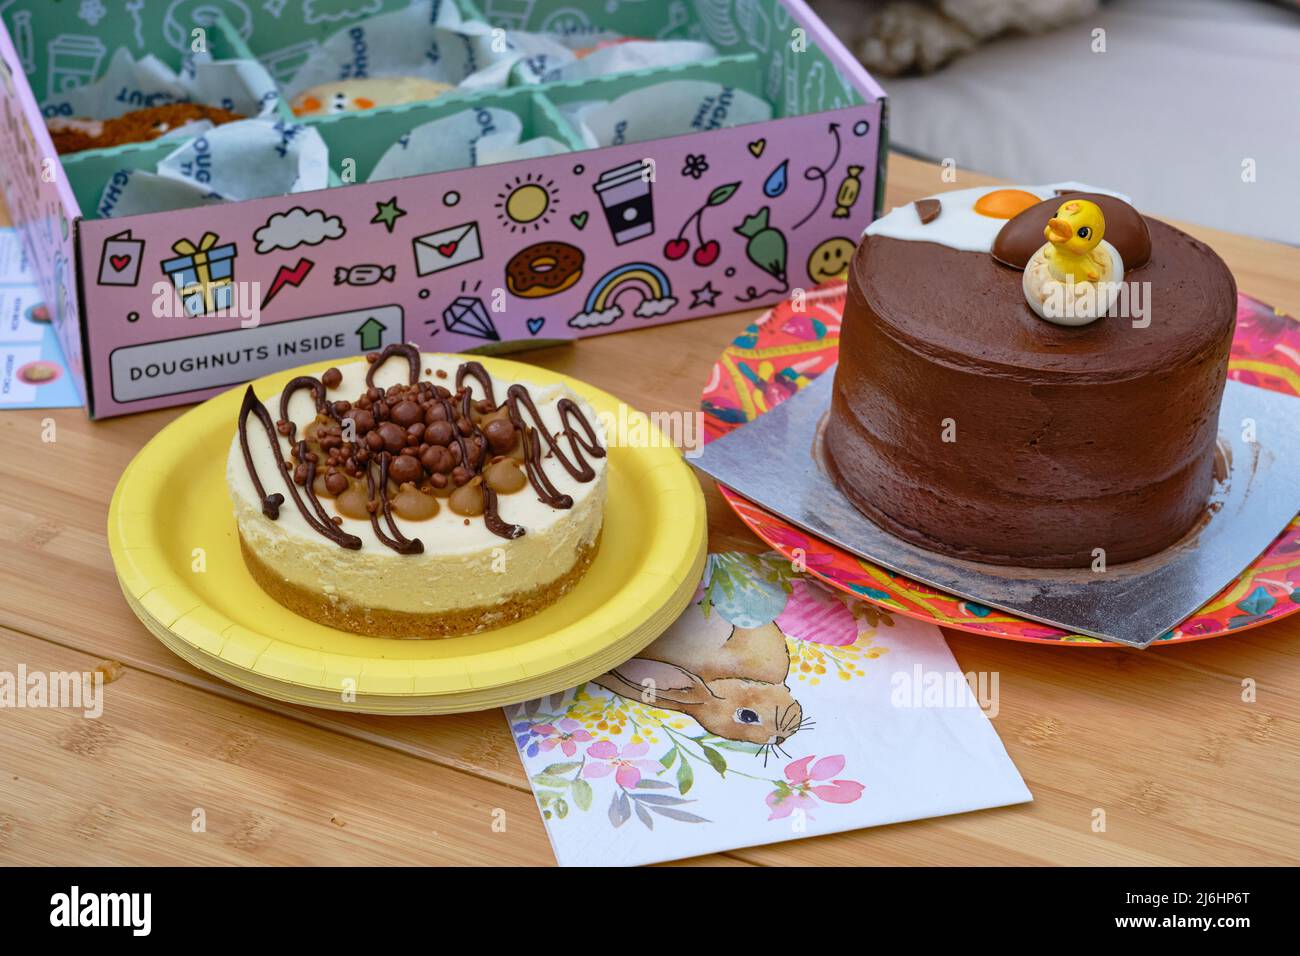 An Easter chocolate cake, cheesecake and doughnuts presented on an outdoor table Stock Photo